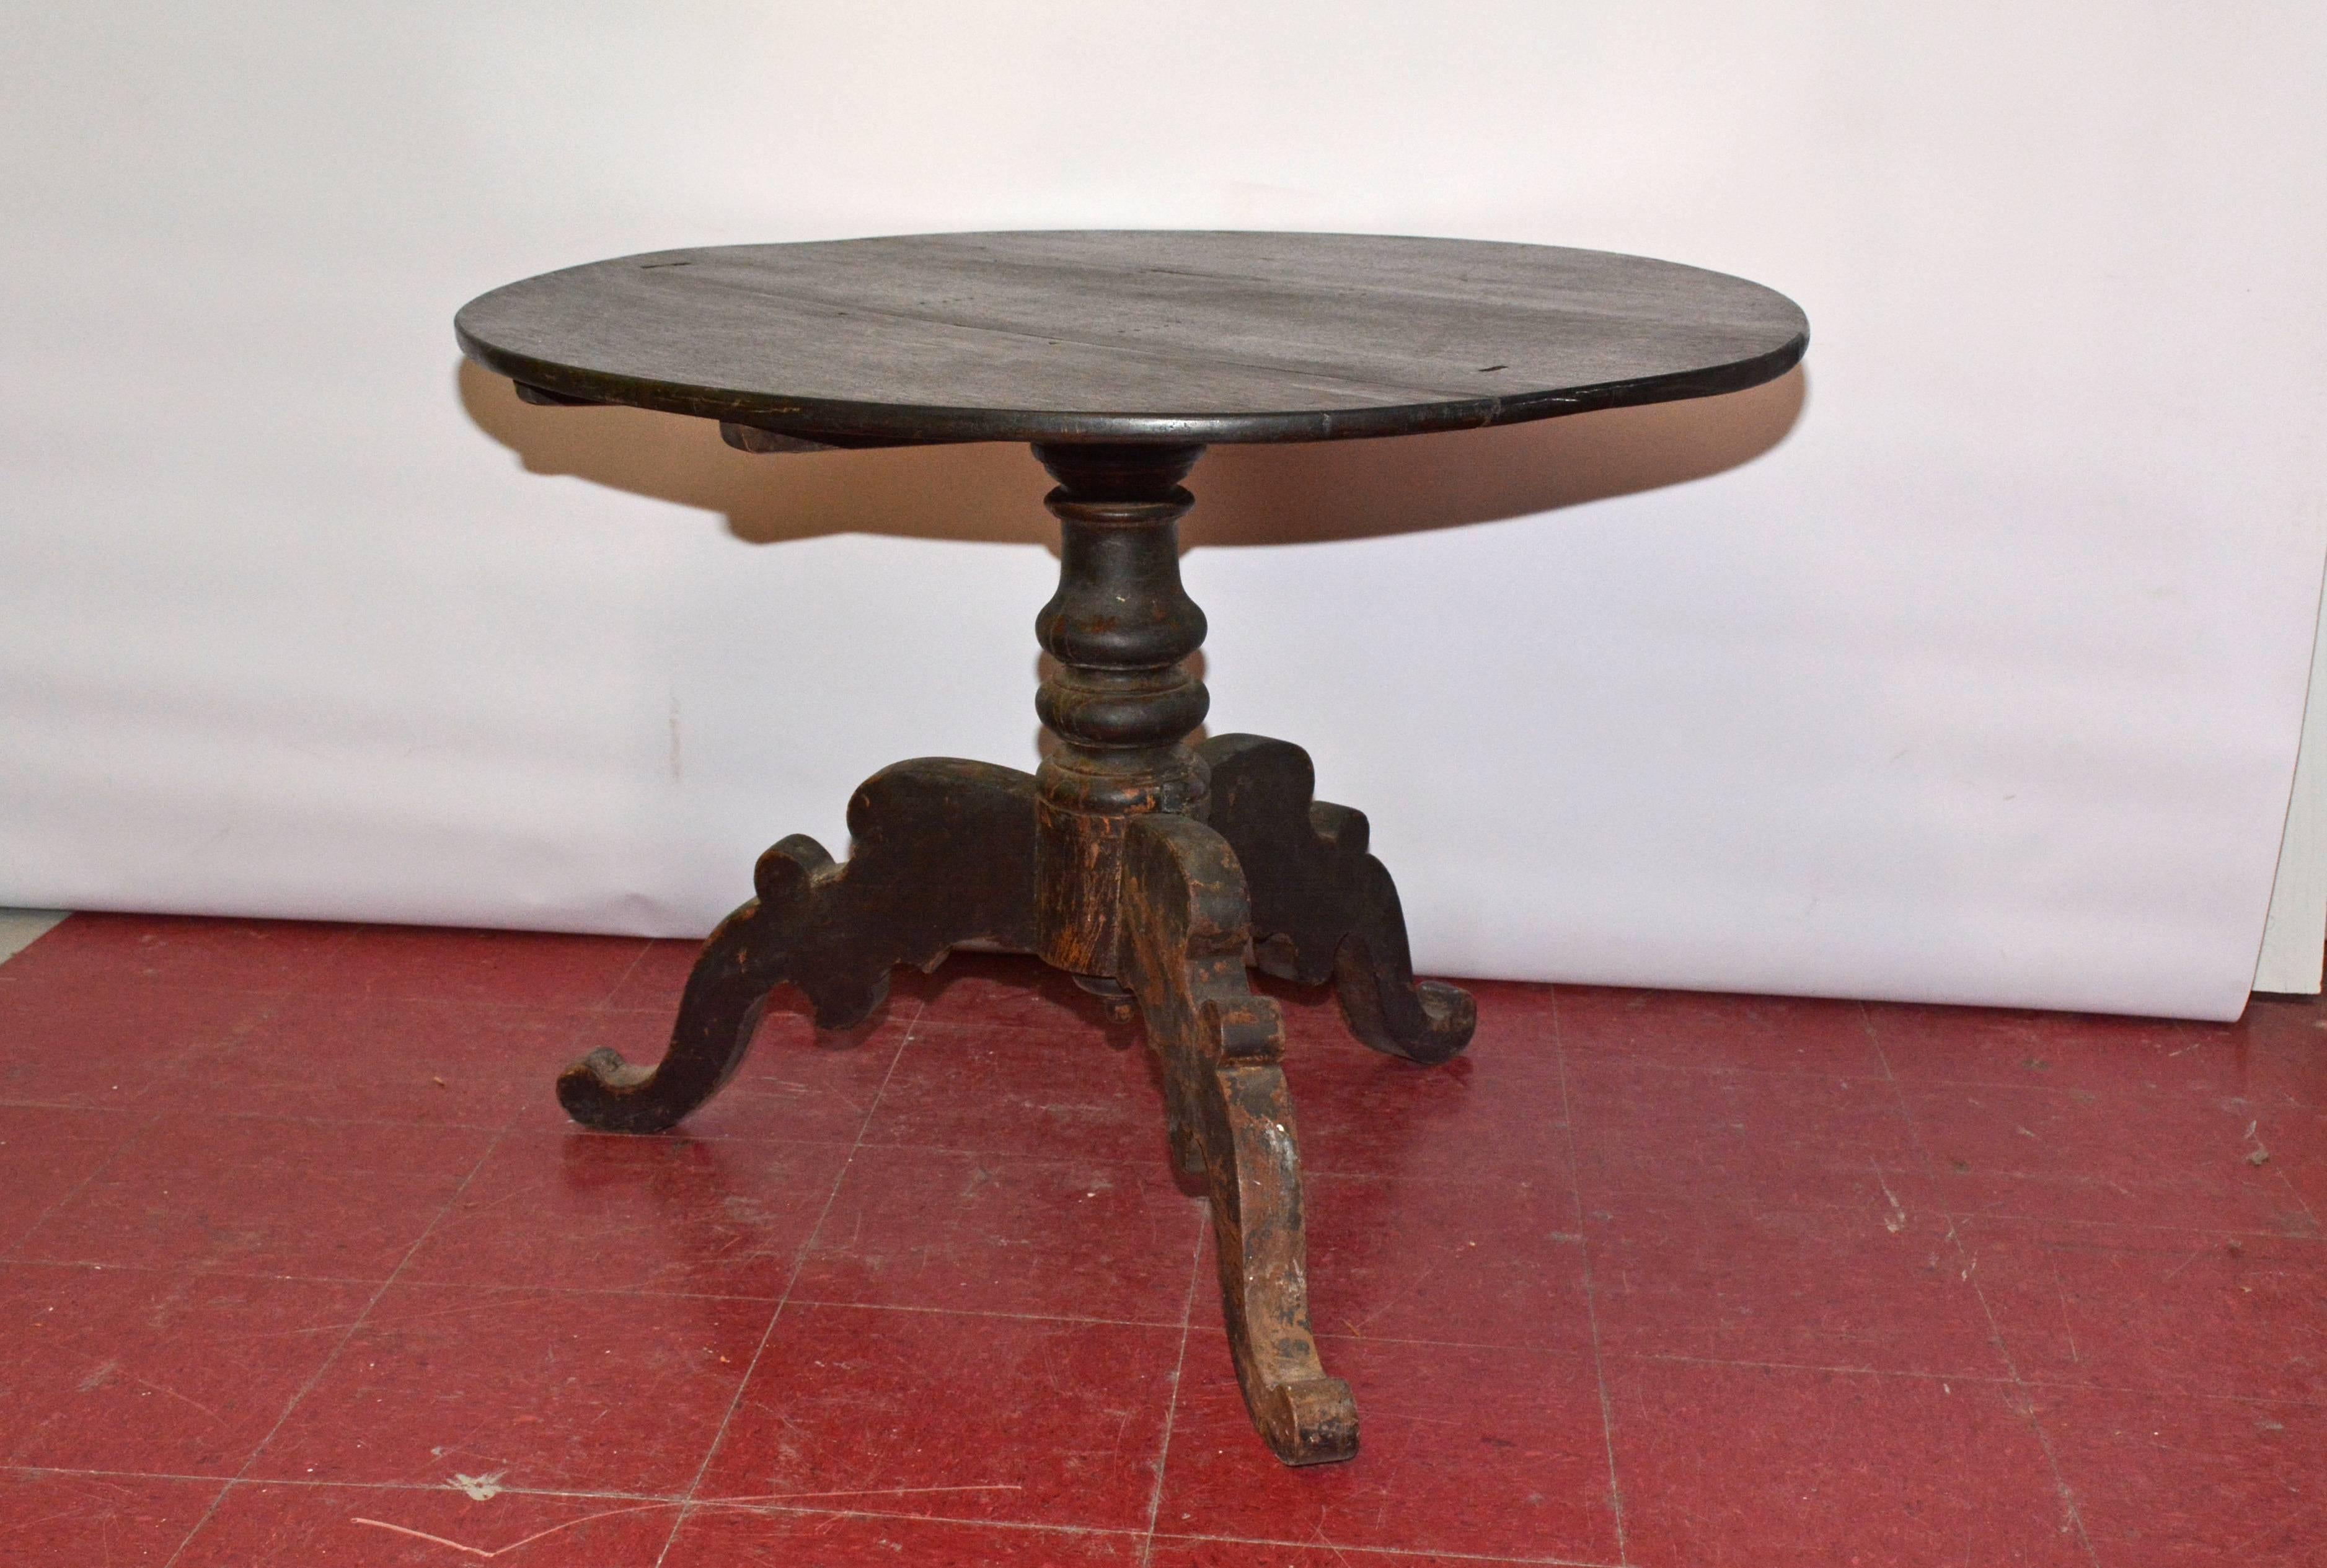 The rustic round Victorian spider-leg breakfast table has three scalloped splayed feet. Perfect for centre hall, small side table, breakfast or wine table.